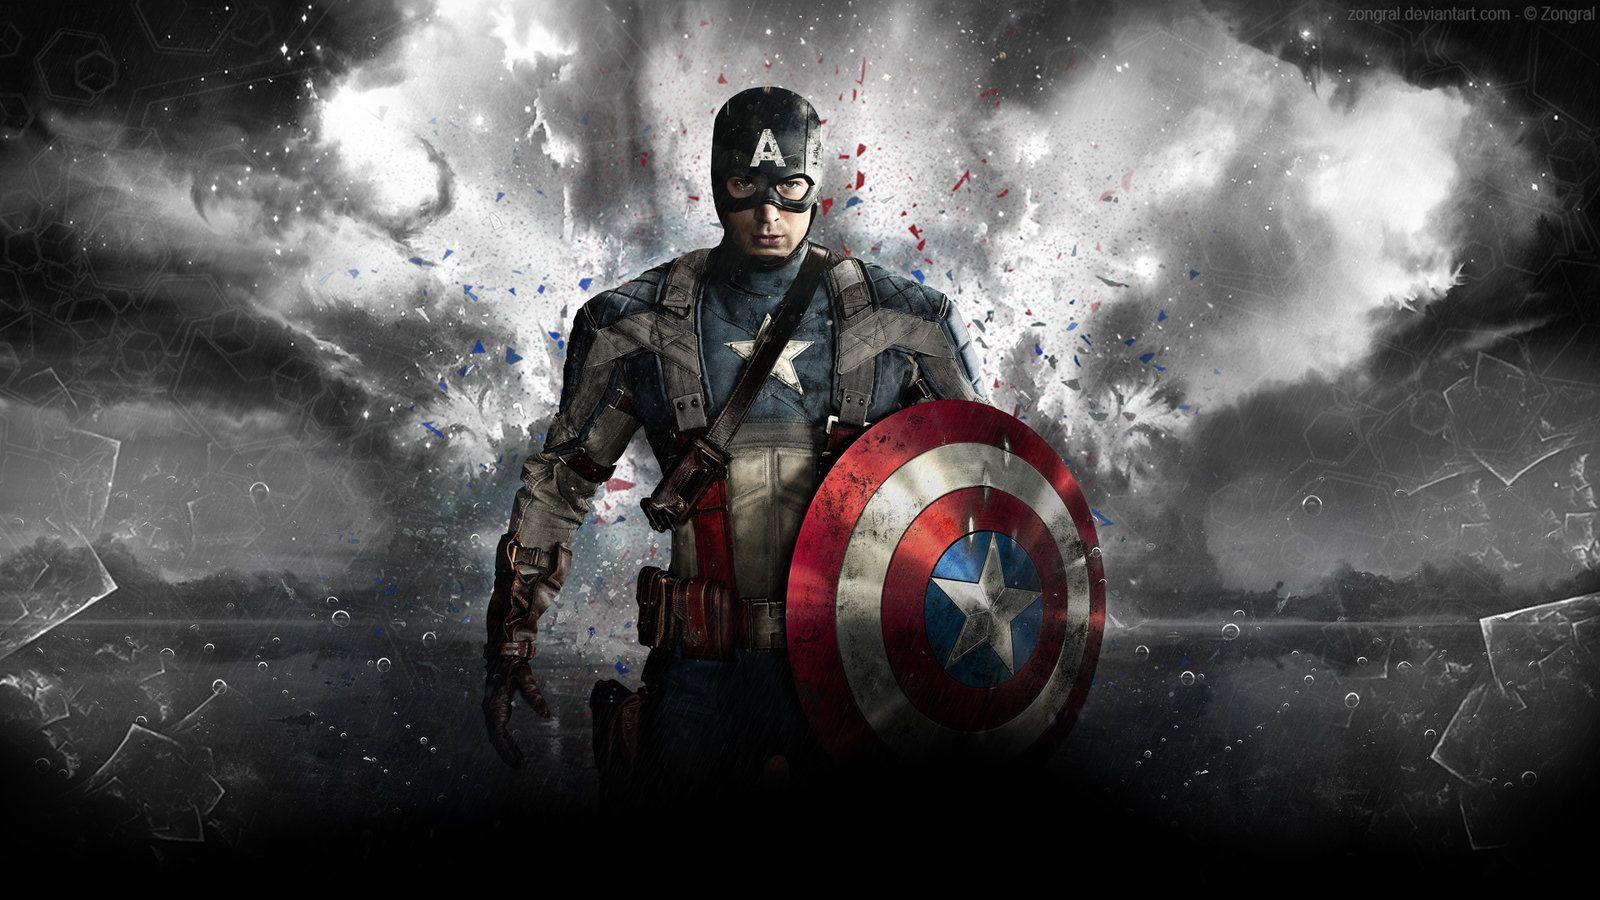 Marvel Captain America Wallpapers Top Free Marvel Captain America Backgrounds Wallpaperaccess 